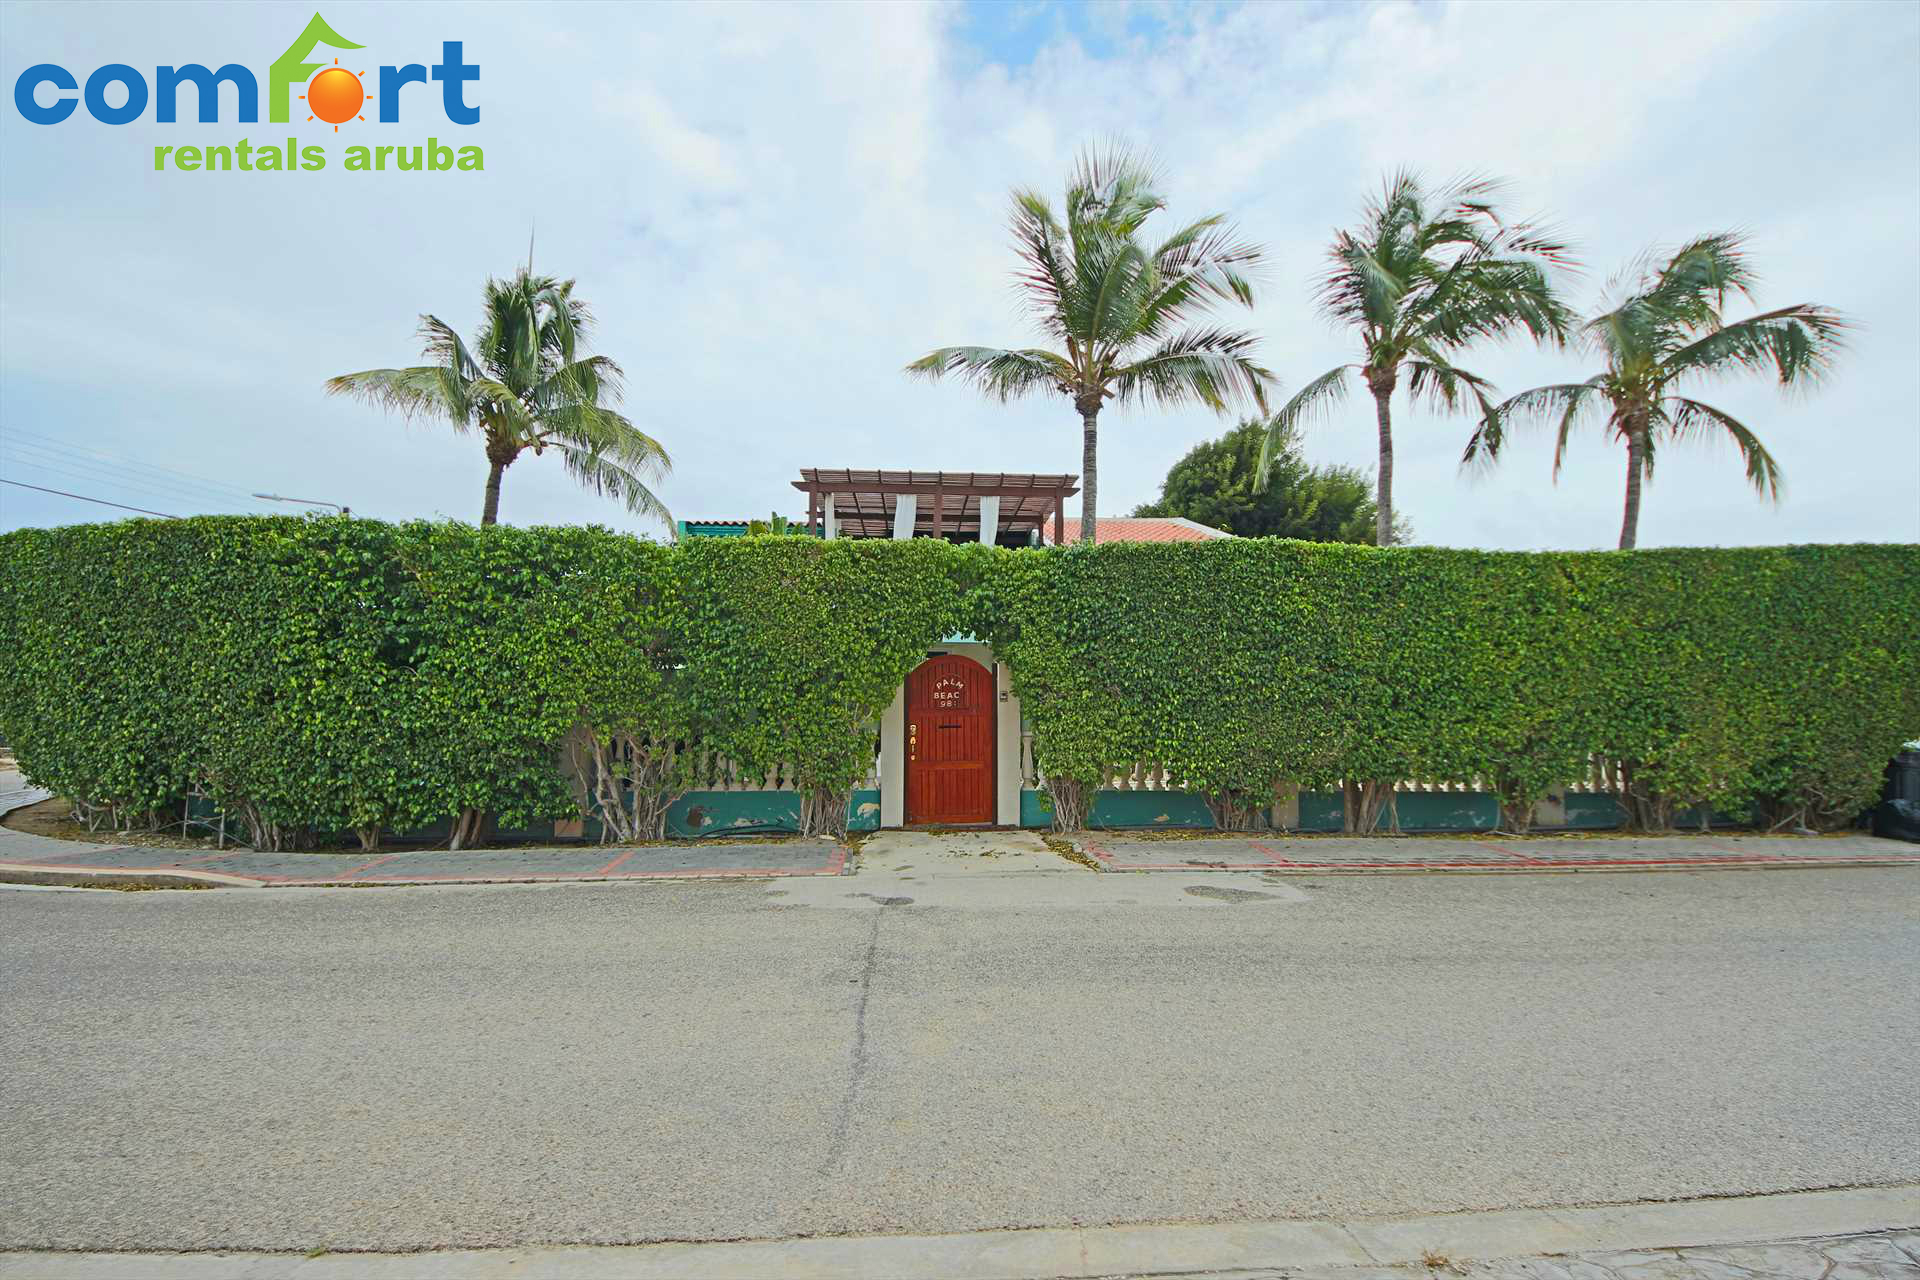 The Palm Beach Fortress has 12-feet high hedges surrounding the property for your privacy